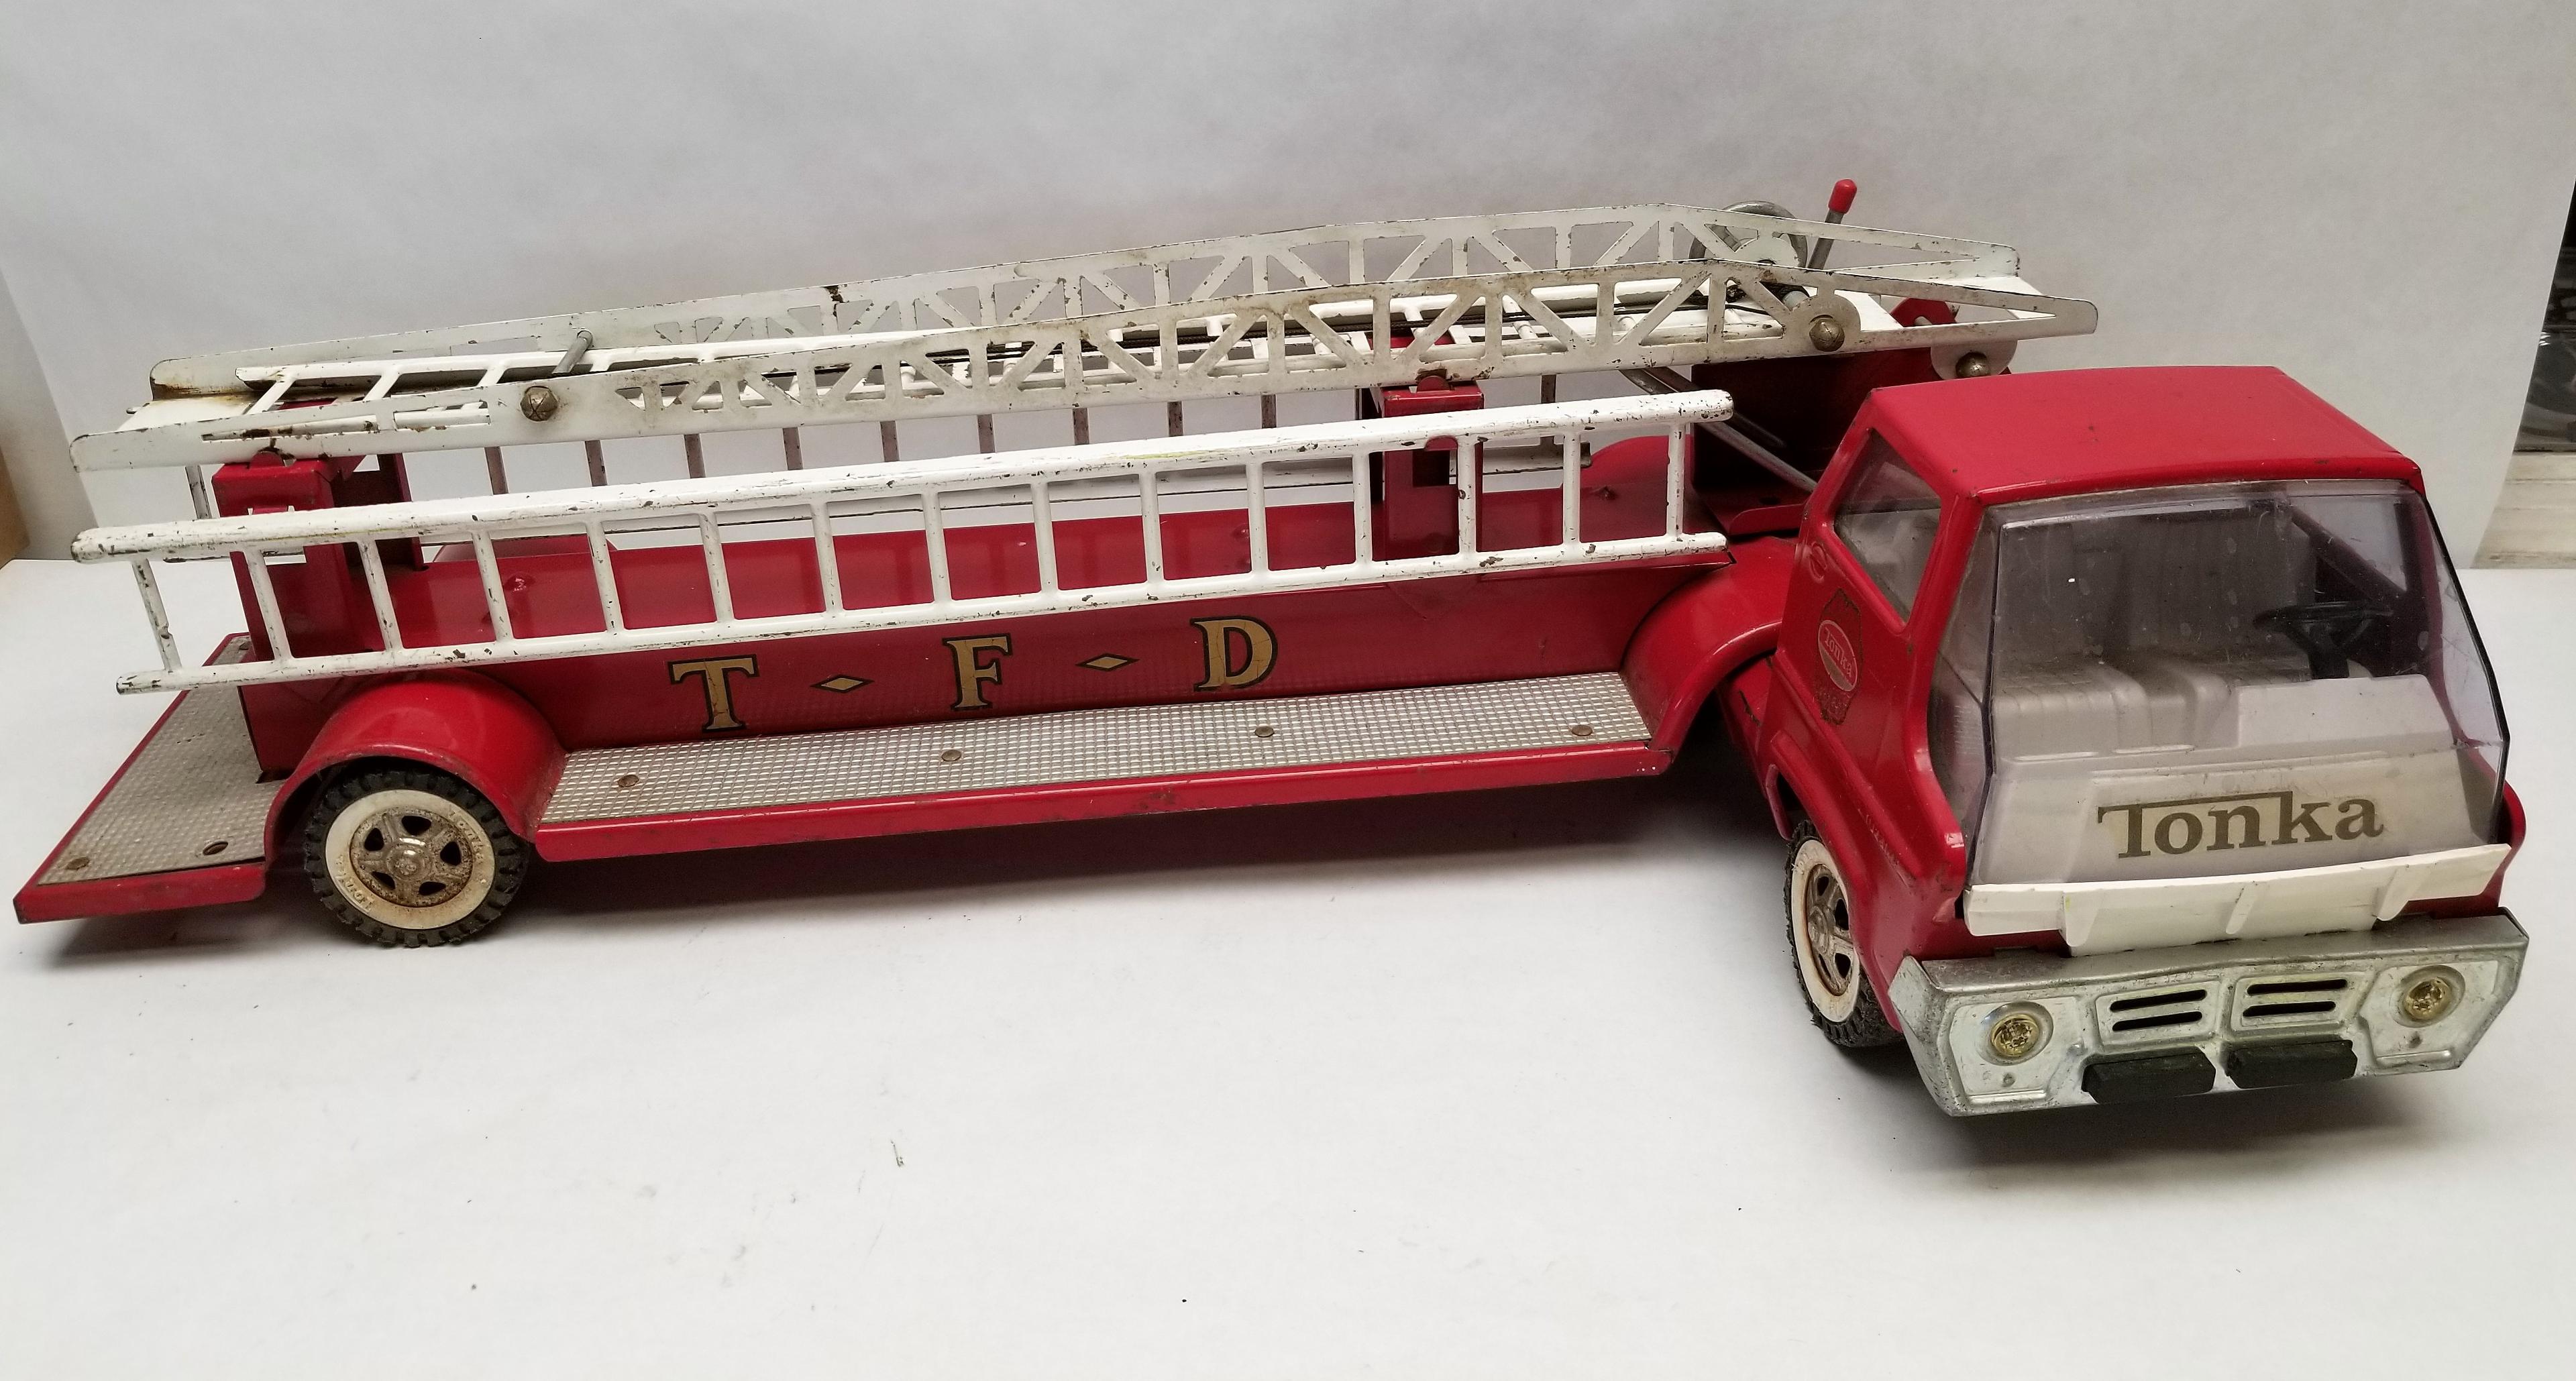 Vintage Tonka T-F-D Hook-and-Ladder Fire Truck